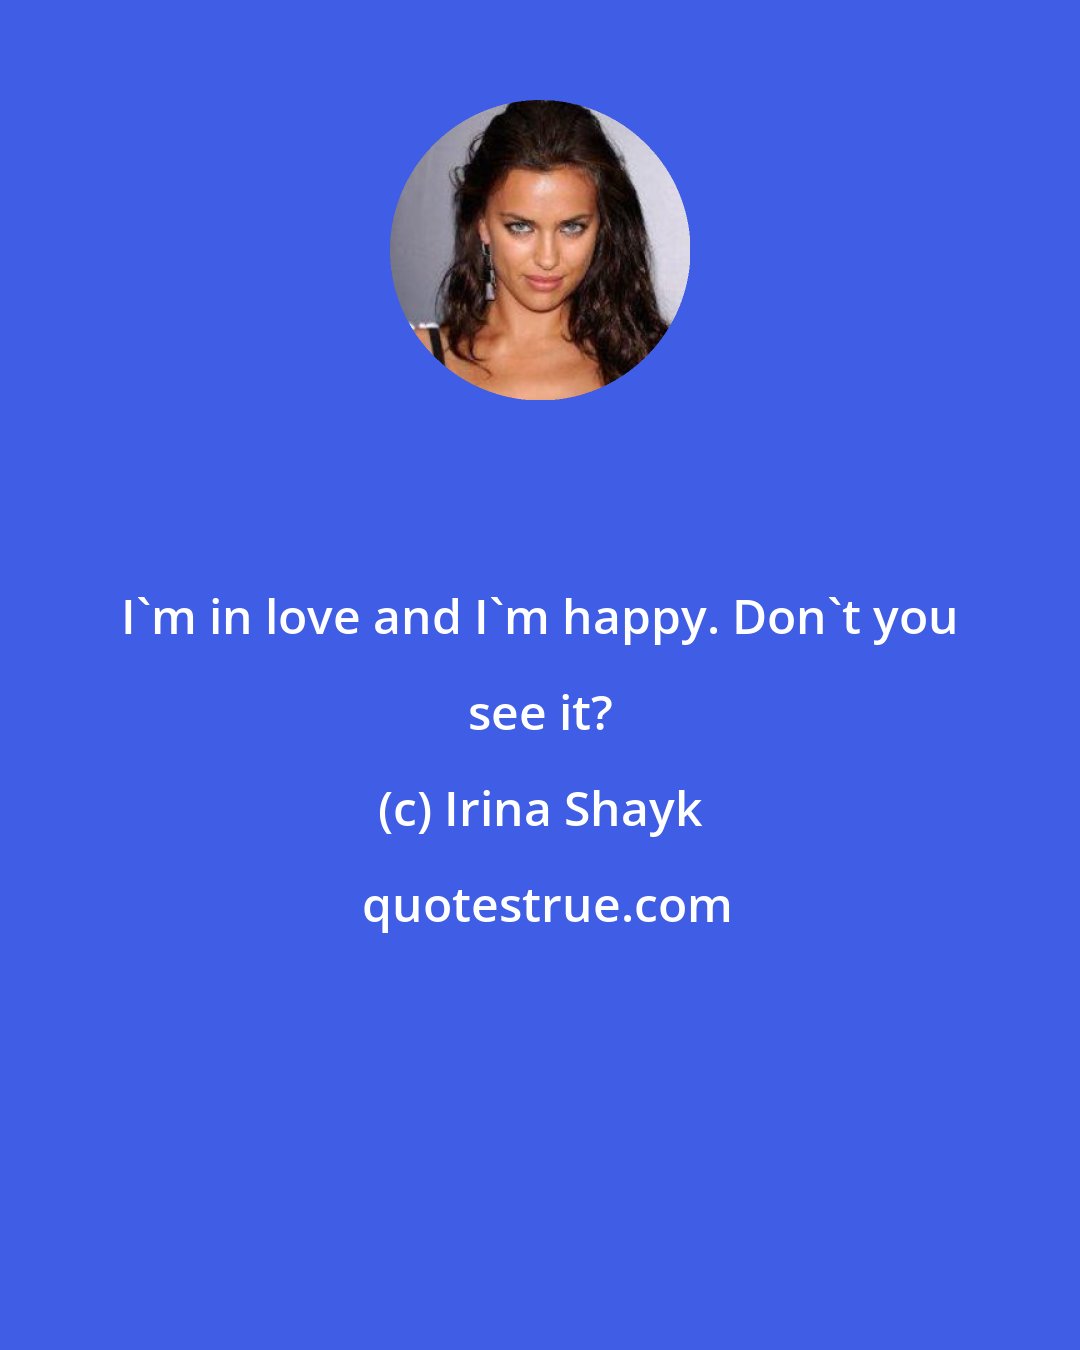 Irina Shayk: I'm in love and I'm happy. Don't you see it?